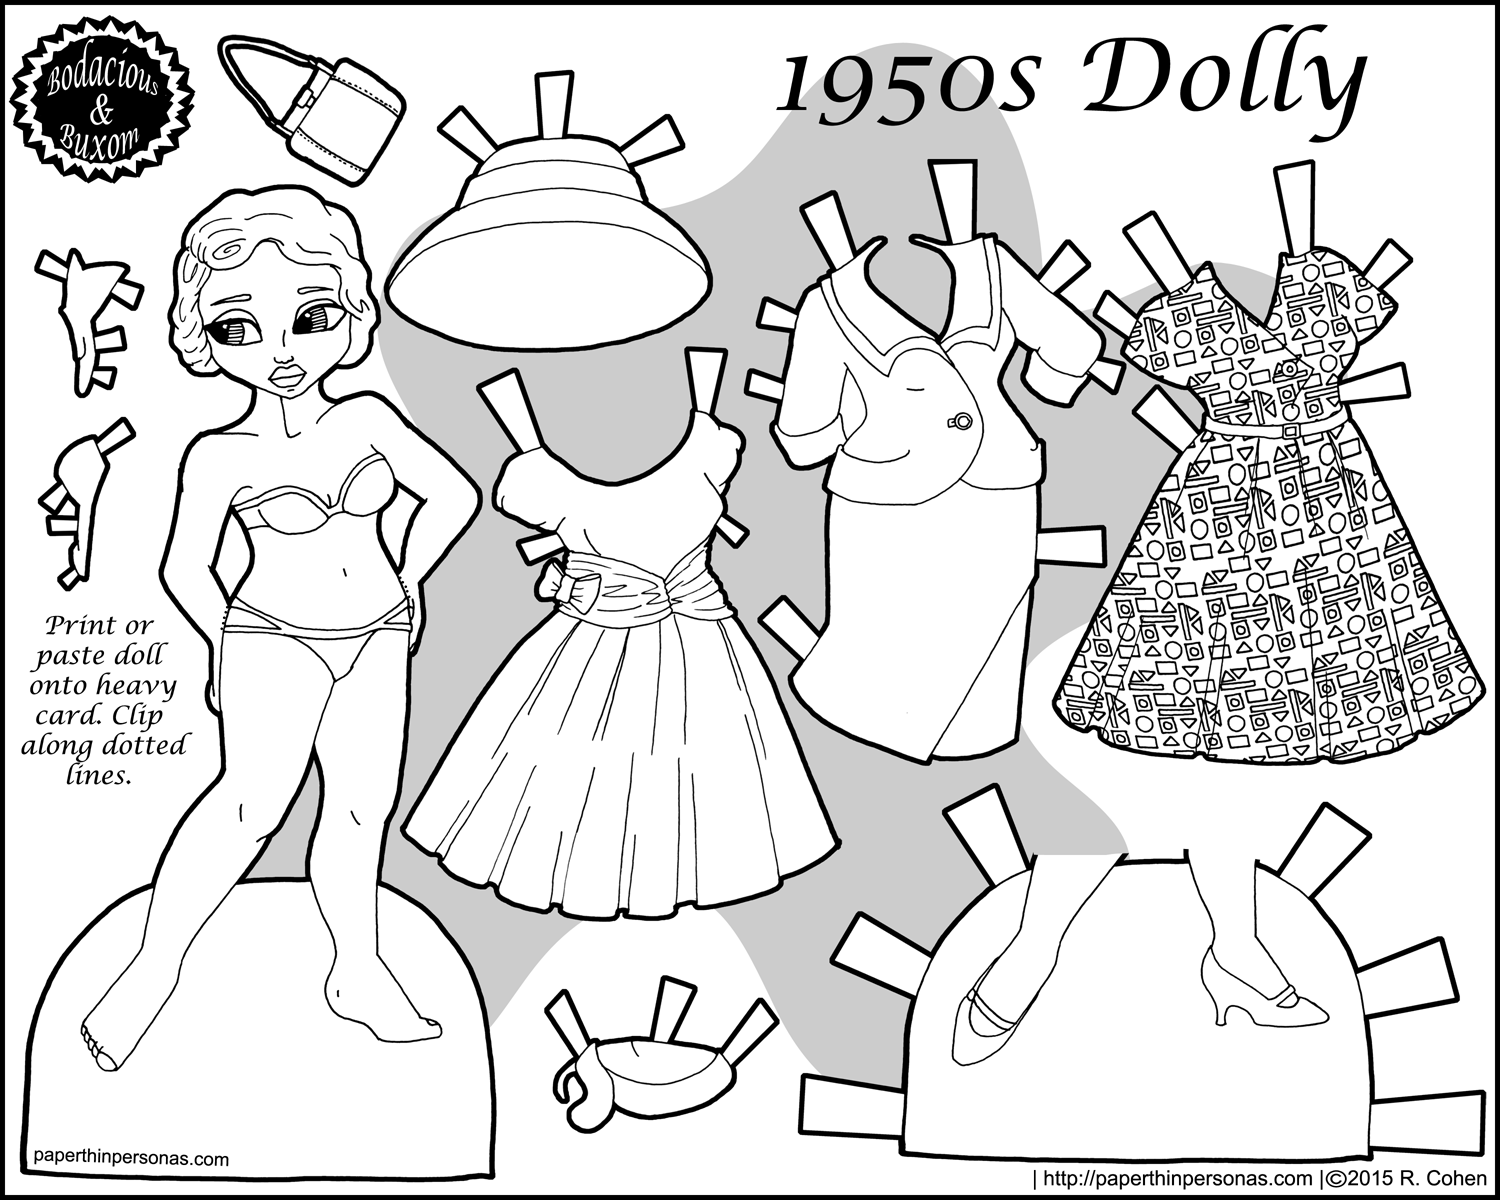 A printable paper doll with a 1950 s vintage wardrobe in black and white She has